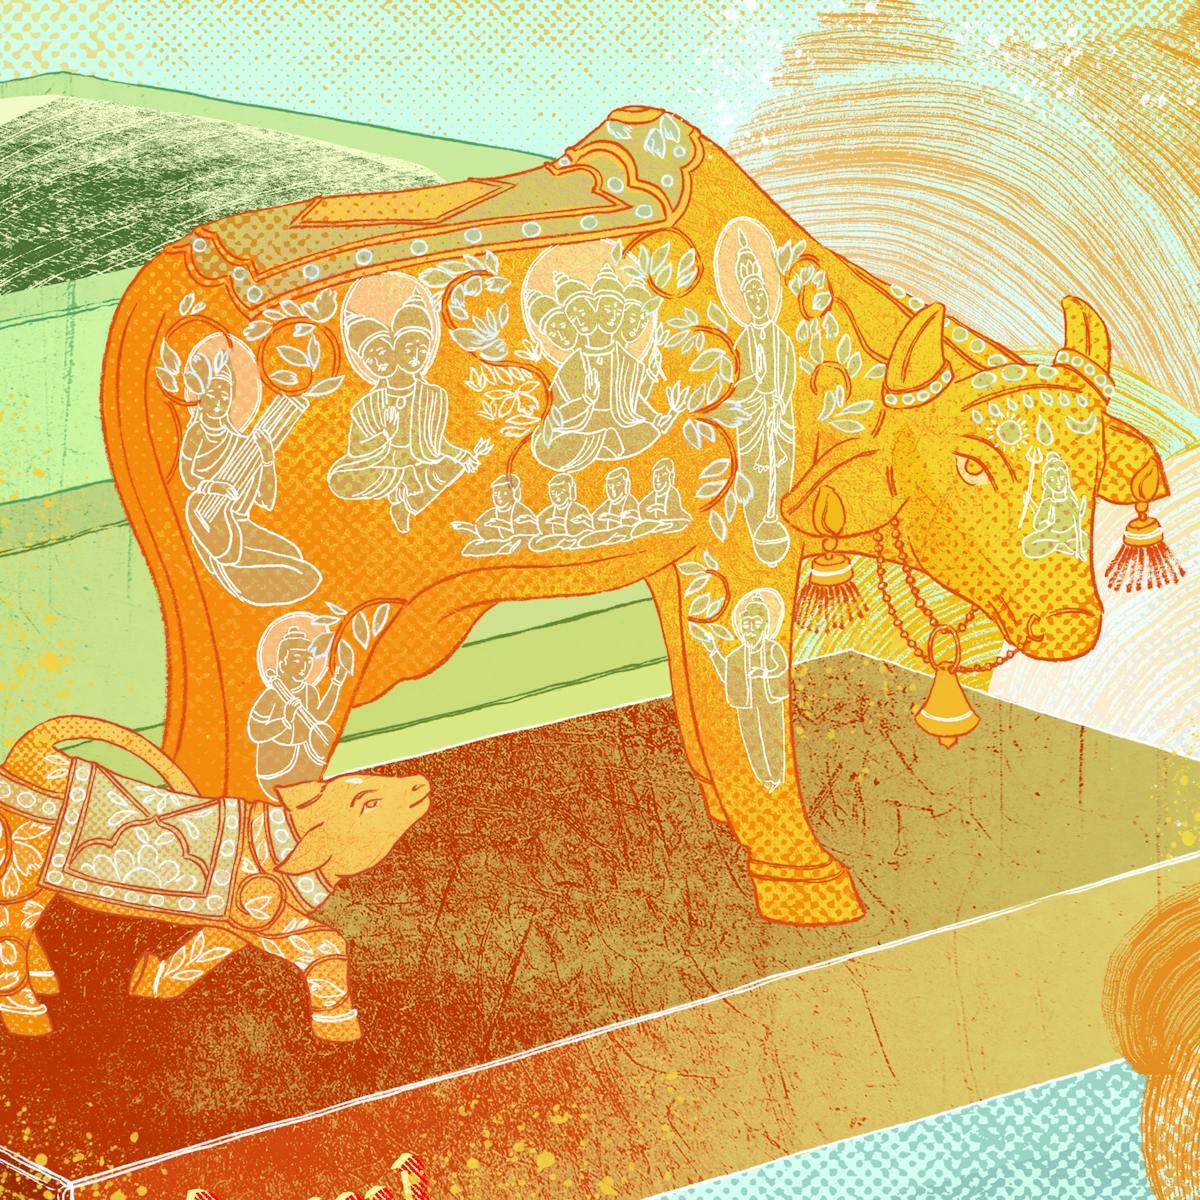 A digital illustration of Kamadhenu (the divine bovine goddess) depicted as a cow standing on packs of Amul butter, with swirls of butter in the background. Kamadhenu and her calf have illustrations of Hindu goddesses and other religious symbols painted on their hides.